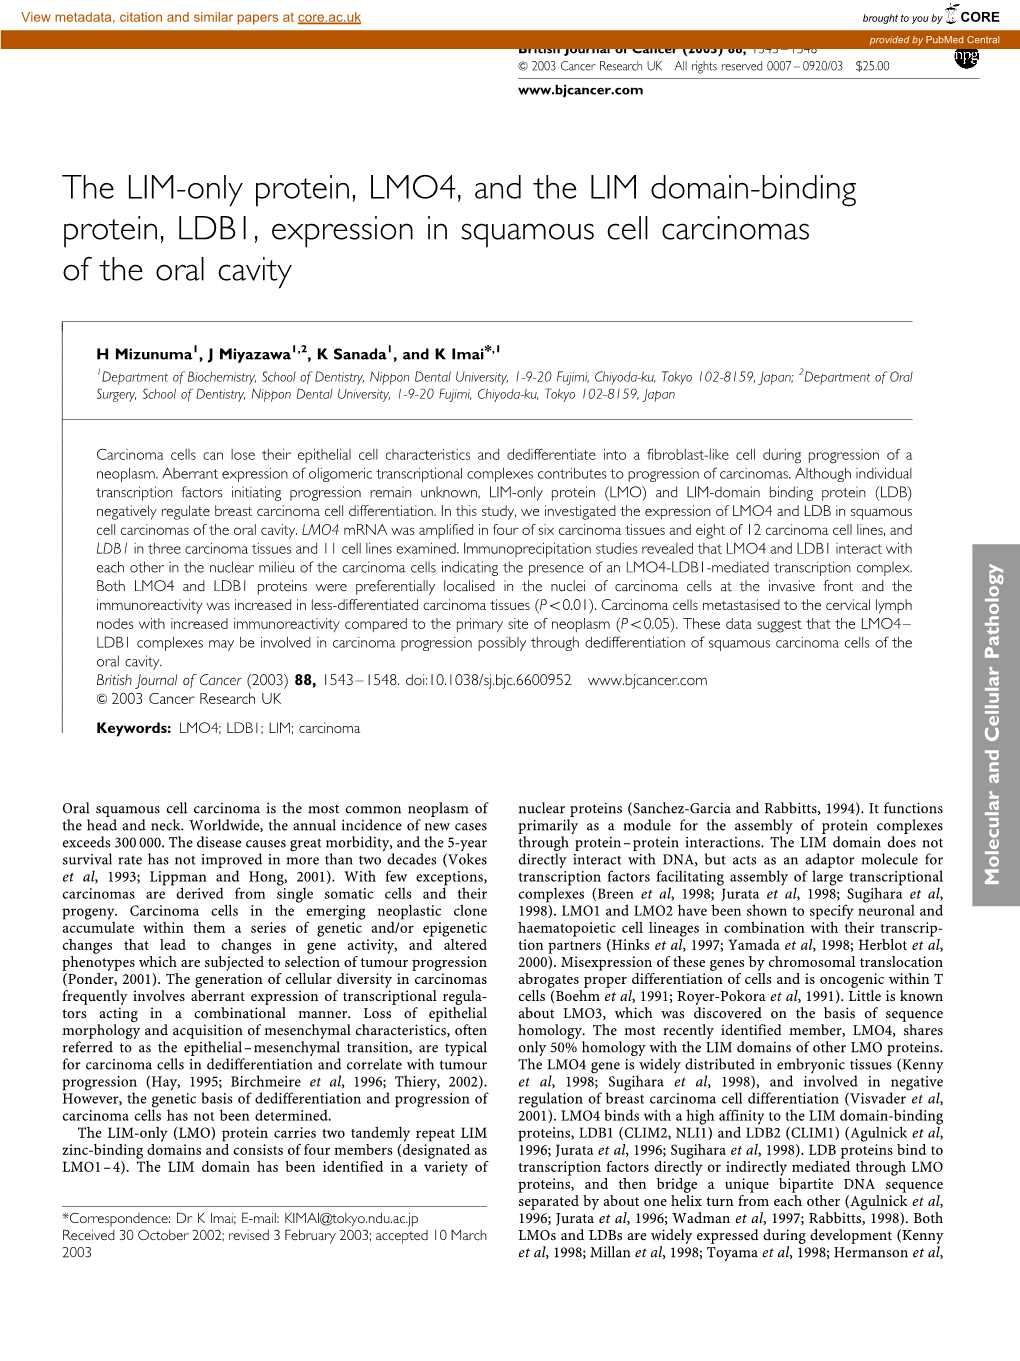 The LIM-Only Protein, LMO4, and the LIM Domain-Binding Protein, LDB1, Expression in Squamous Cell Carcinomas of the Oral Cavity